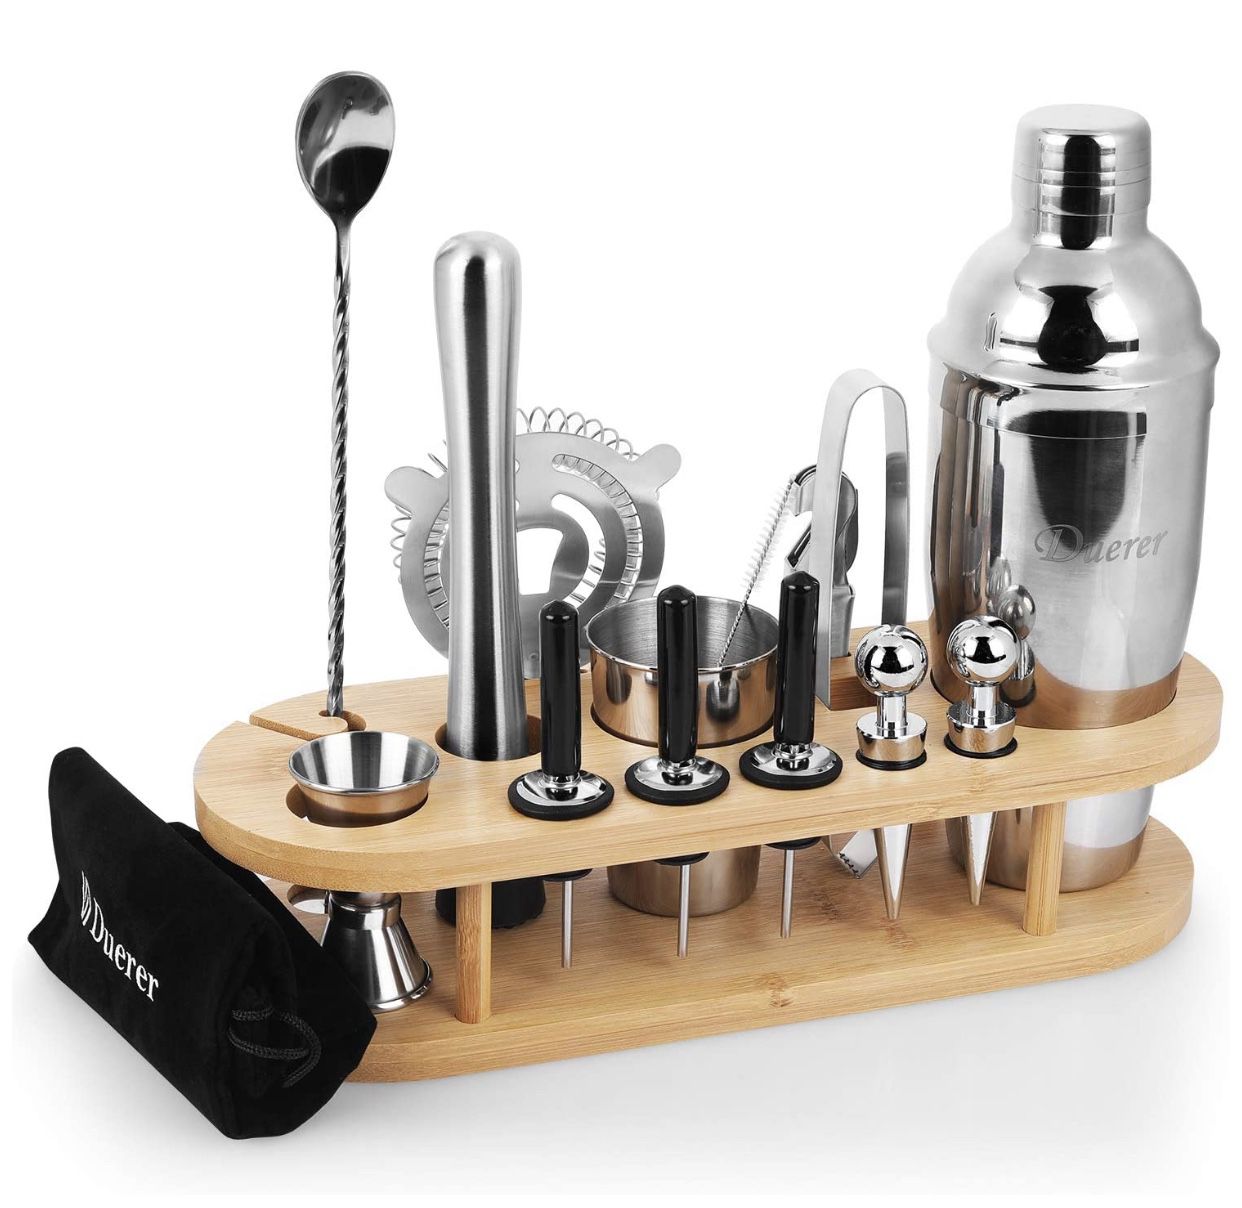 Duerer Bartender Kit with Stand, 23-Piece Cocktail Kit with Stylish Bamboo Stand